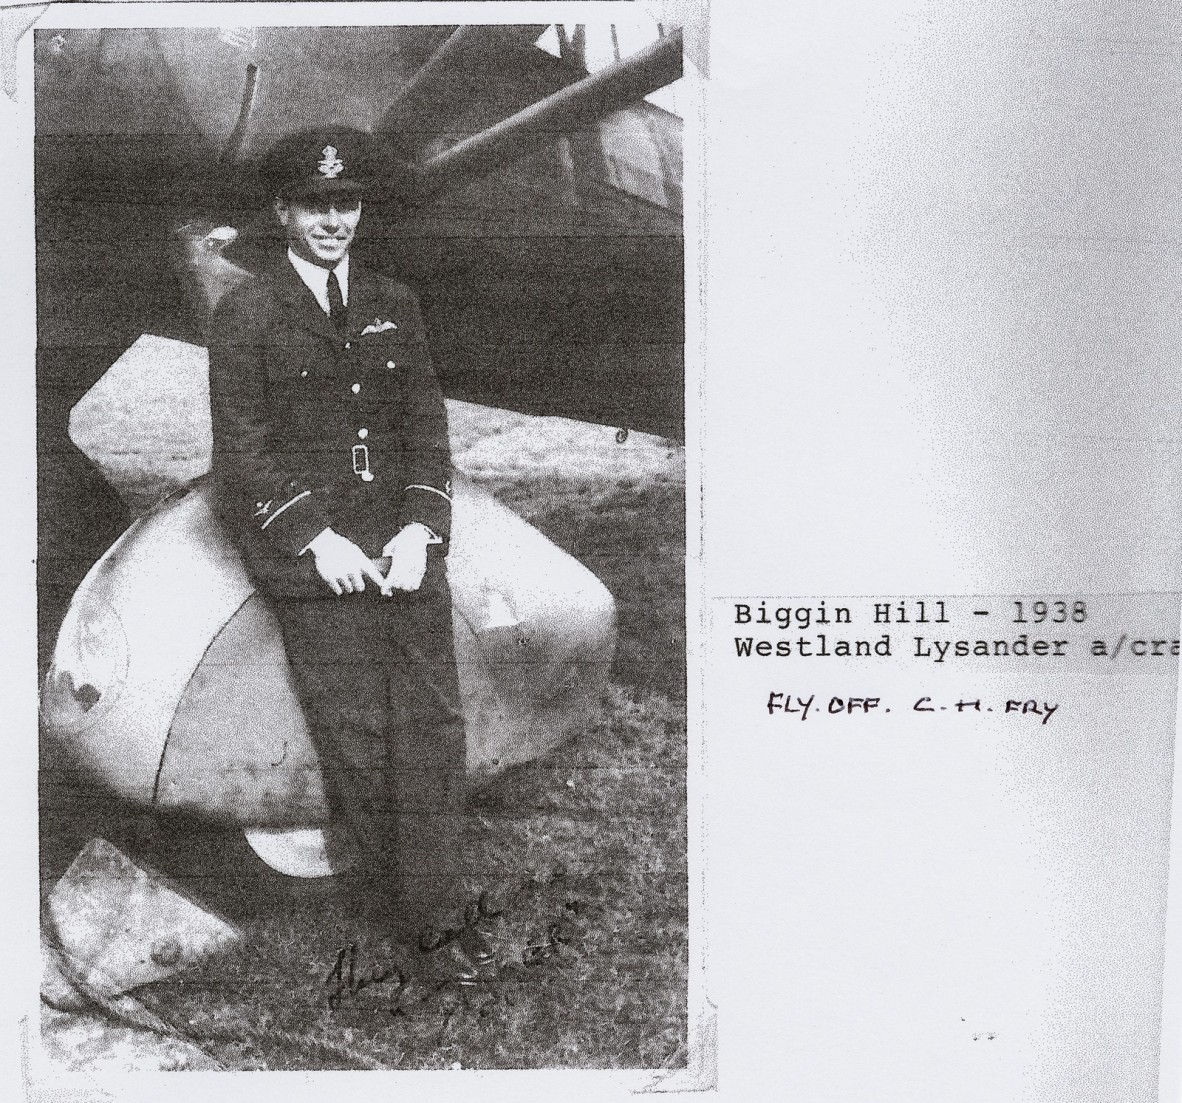 Charles Fry at Biggin Hill standing in front of a Westland Lysander aircraft 1938